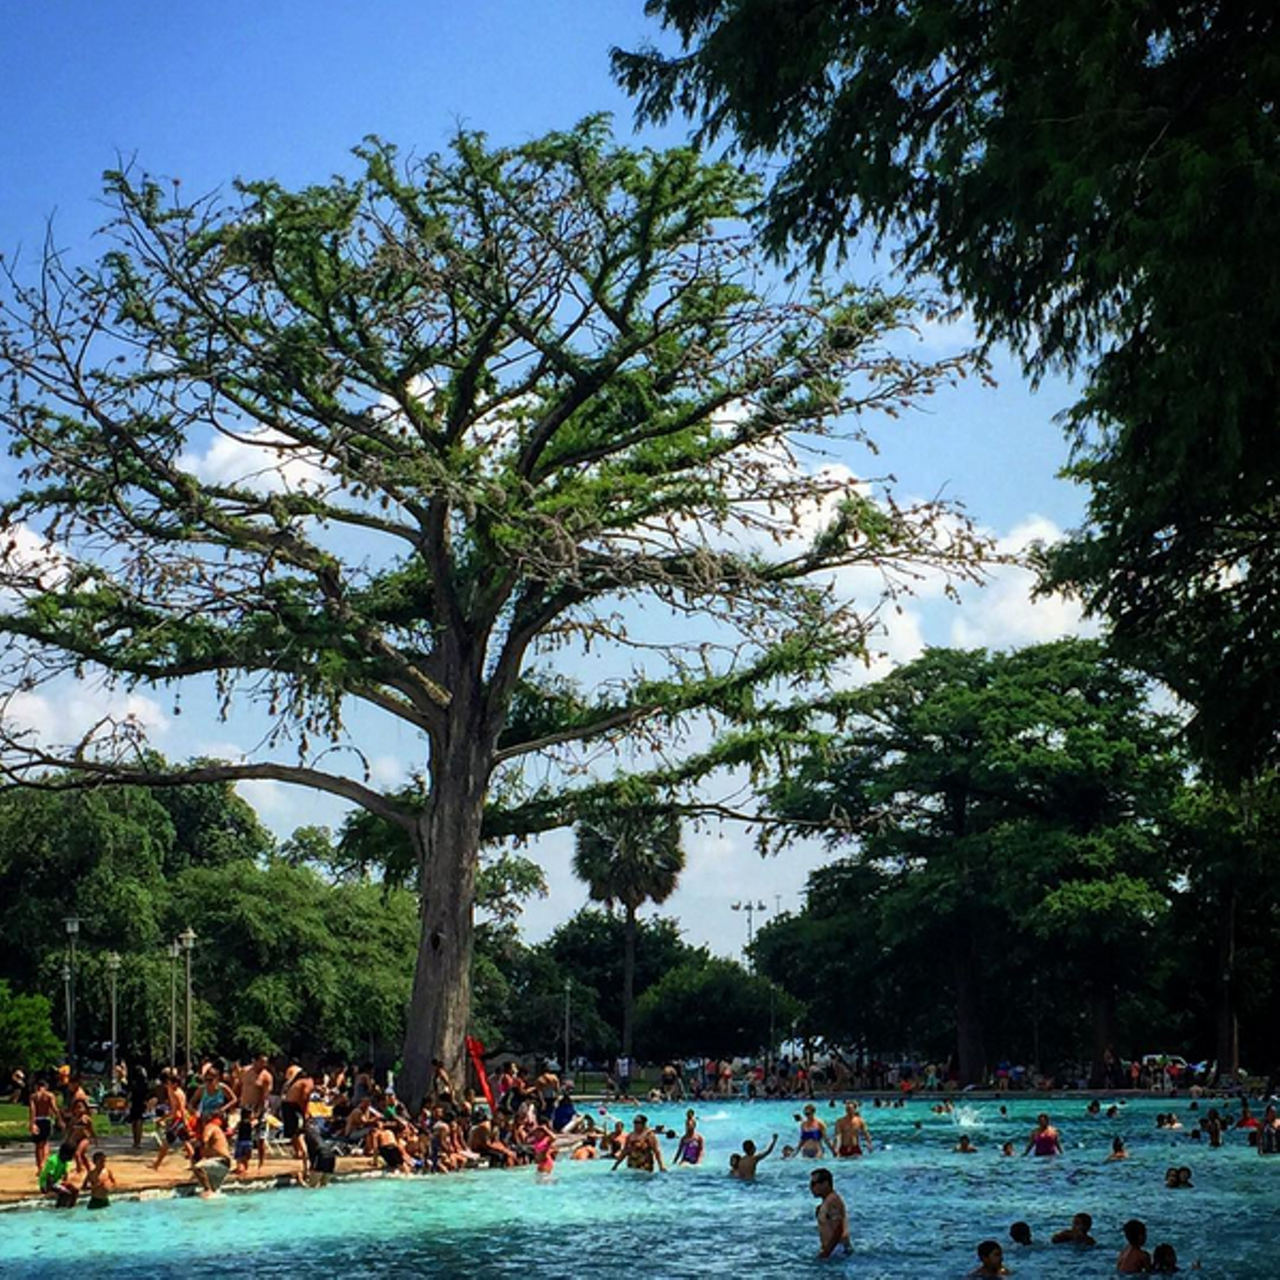 San Pedro Pool
1315 San Pedro Ave.This massive swimming pool, located in the second oldest park in the city, offers plenty of space to cool off in the freshest water possible. It's easily the best place to swim for free in San Antonio.  
Instagram/instagramtexas